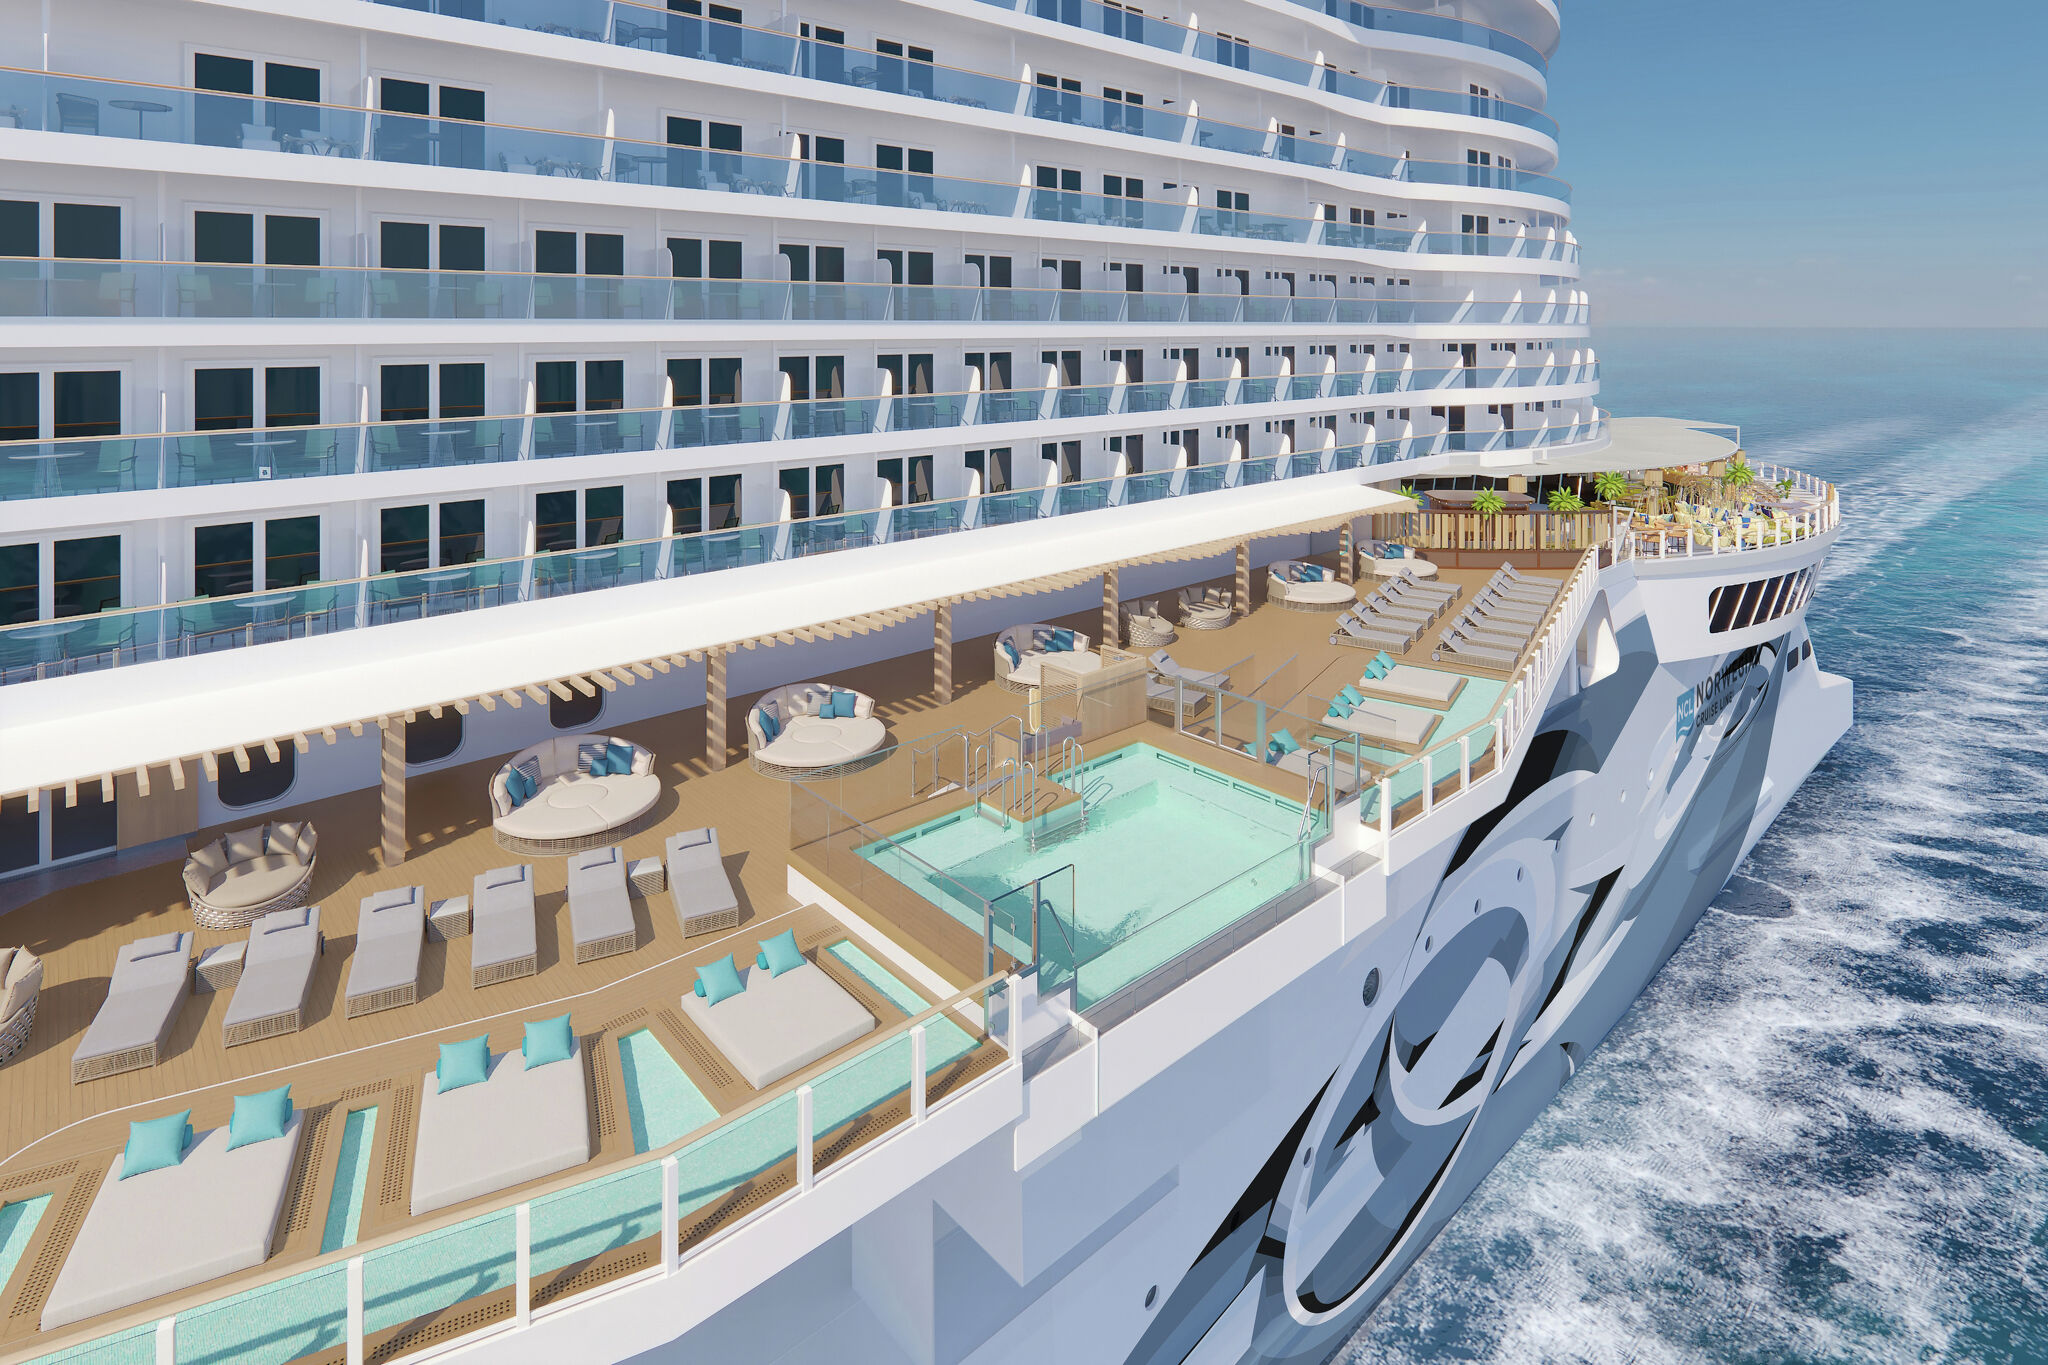 What to know about Norwegian Cruise Line's Prima cruise ship